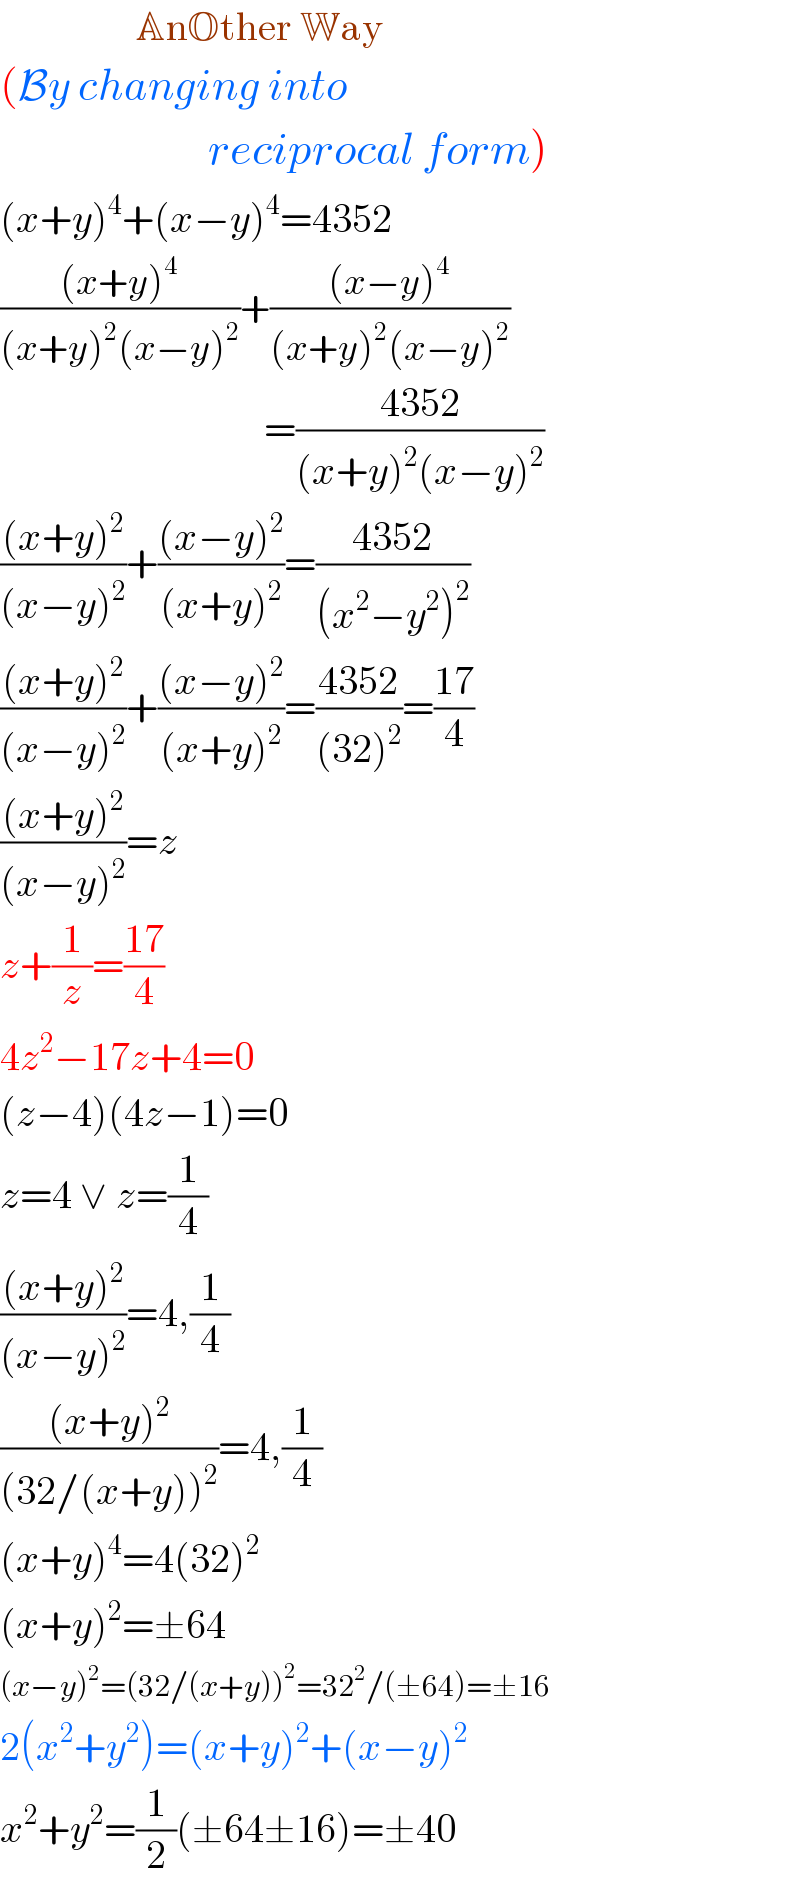                  AnOther Way  (By changing into                            reciprocal form)  (x+y)^4 +(x−y)^4 =4352  (((x+y)^4 )/((x+y)^2 (x−y)^2 ))+(((x−y)^4 )/((x+y)^2 (x−y)^2 ))                                   =((4352)/((x+y)^2 (x−y)^2 ))  (((x+y)^2 )/((x−y)^2 ))+(((x−y)^2 )/((x+y)^2 ))=((4352)/((x^2 −y^2 )^2 ))  (((x+y)^2 )/((x−y)^2 ))+(((x−y)^2 )/((x+y)^2 ))=((4352)/((32)^2 ))=((17)/4)  (((x+y)^2 )/((x−y)^2 ))=z   z+(1/z)=((17)/4)  4z^2 −17z+4=0  (z−4)(4z−1)=0  z=4 ∨ z=(1/4)  (((x+y)^2 )/((x−y)^2 ))=4,(1/4)  (((x+y)^2 )/((32/(x+y))^2 ))=4,(1/4)  (x+y)^4 =4(32)^2   (x+y)^2 =±64  (x−y)^2 =(32/(x+y))^2 =32^2 /(±64)=±16  2(x^2 +y^2 )=(x+y)^2 +(x−y)^2   x^2 +y^2 =(1/2)(±64±16)=±40  